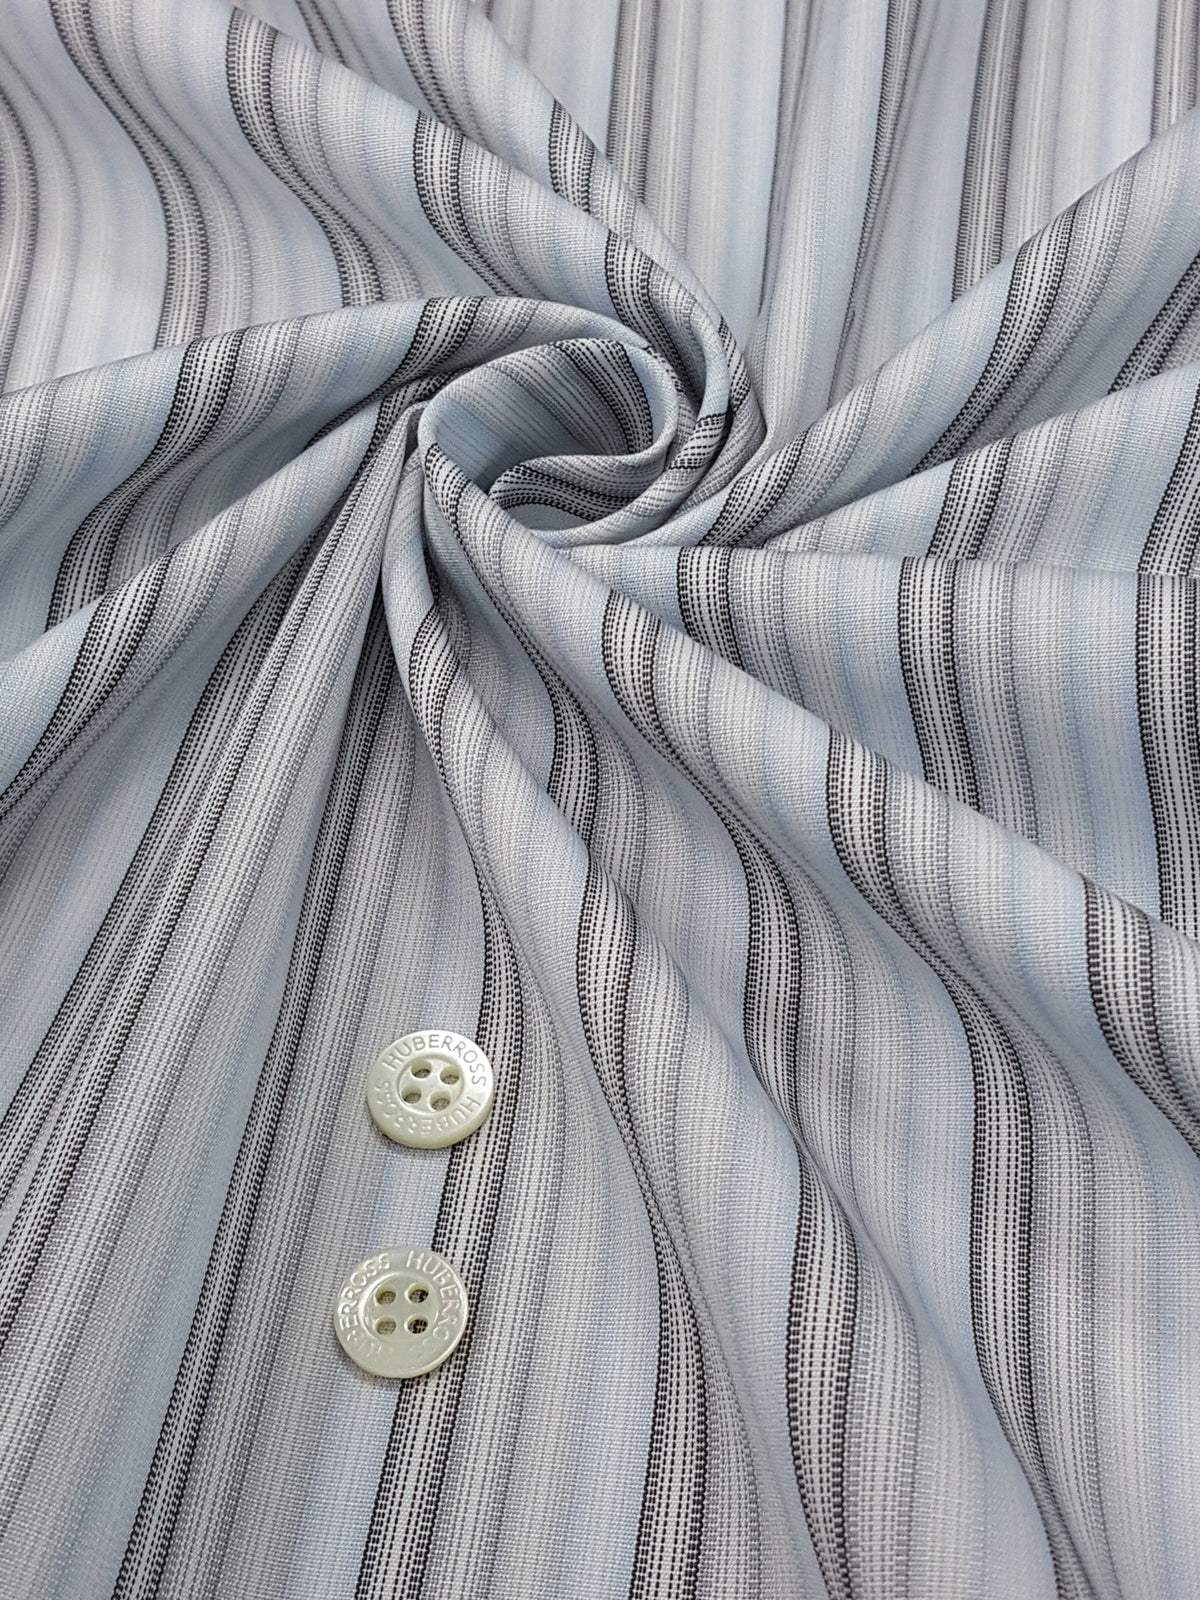 HUBERROSS 100&#39;s by 100&#39;s 2 plys Poplin Cotton 100% Egyptian Cotton Cloth Made in Italy  Width: 58&#39;&#39; / 150cm